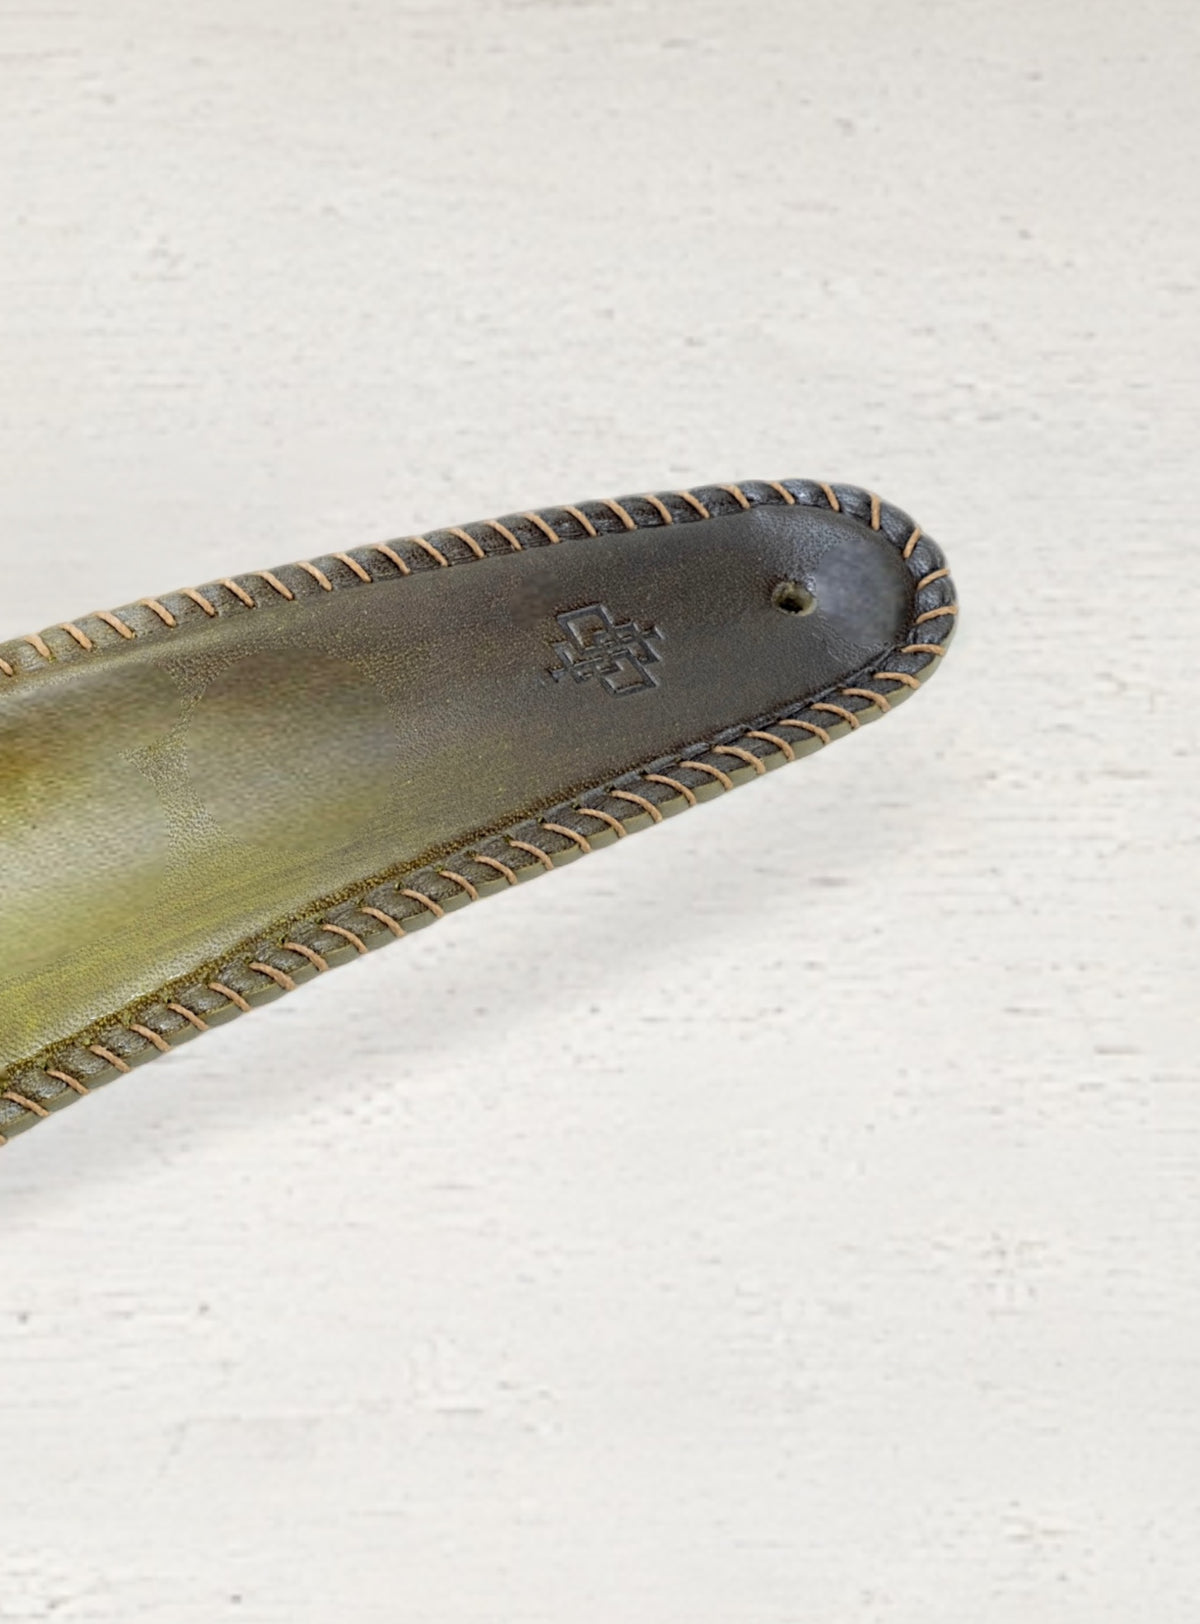 Shoe Horn - Leather